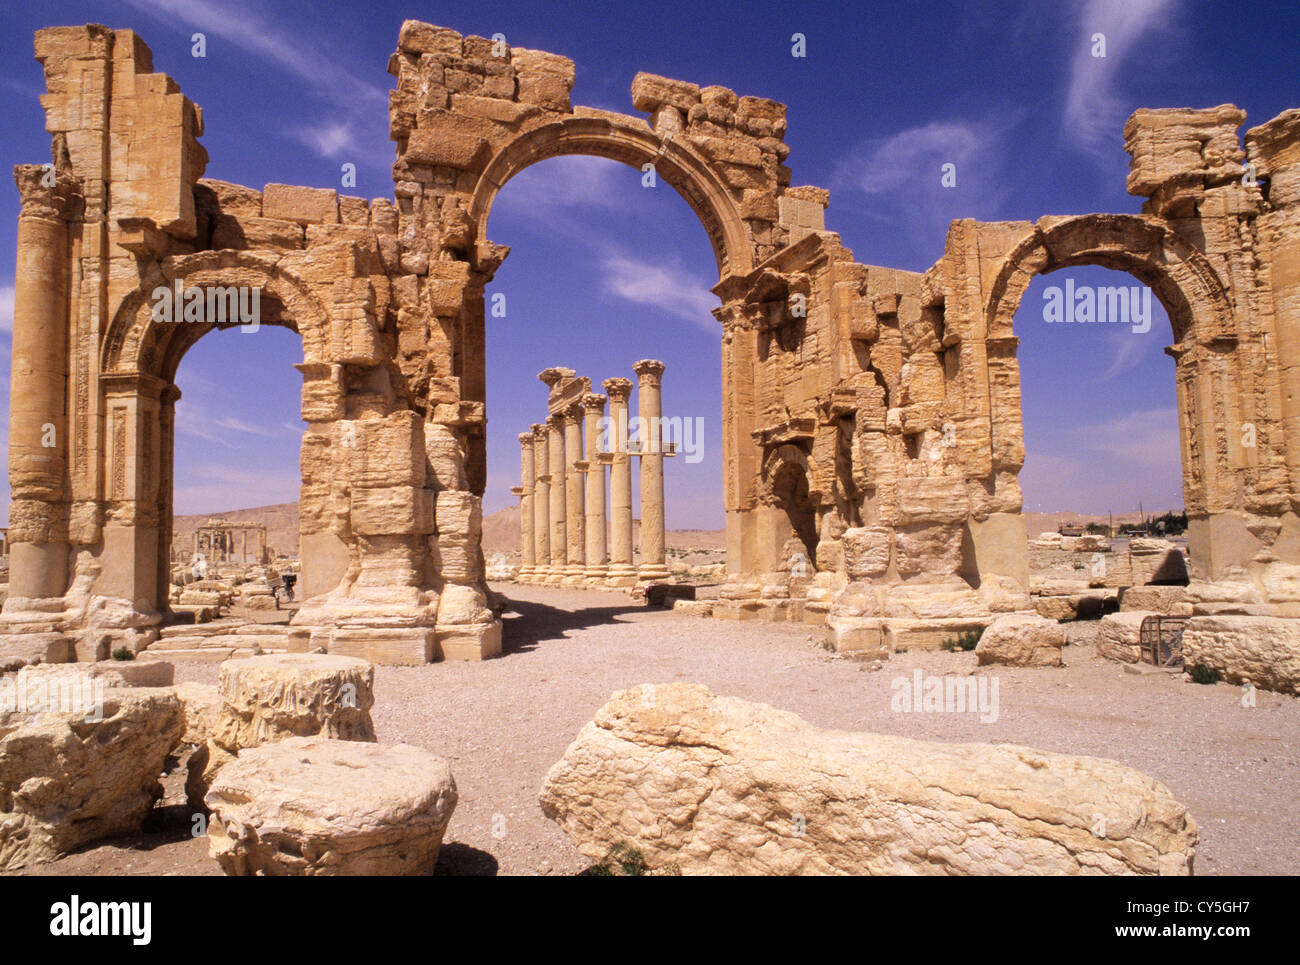 palmira, syria, middle east Stock Photo